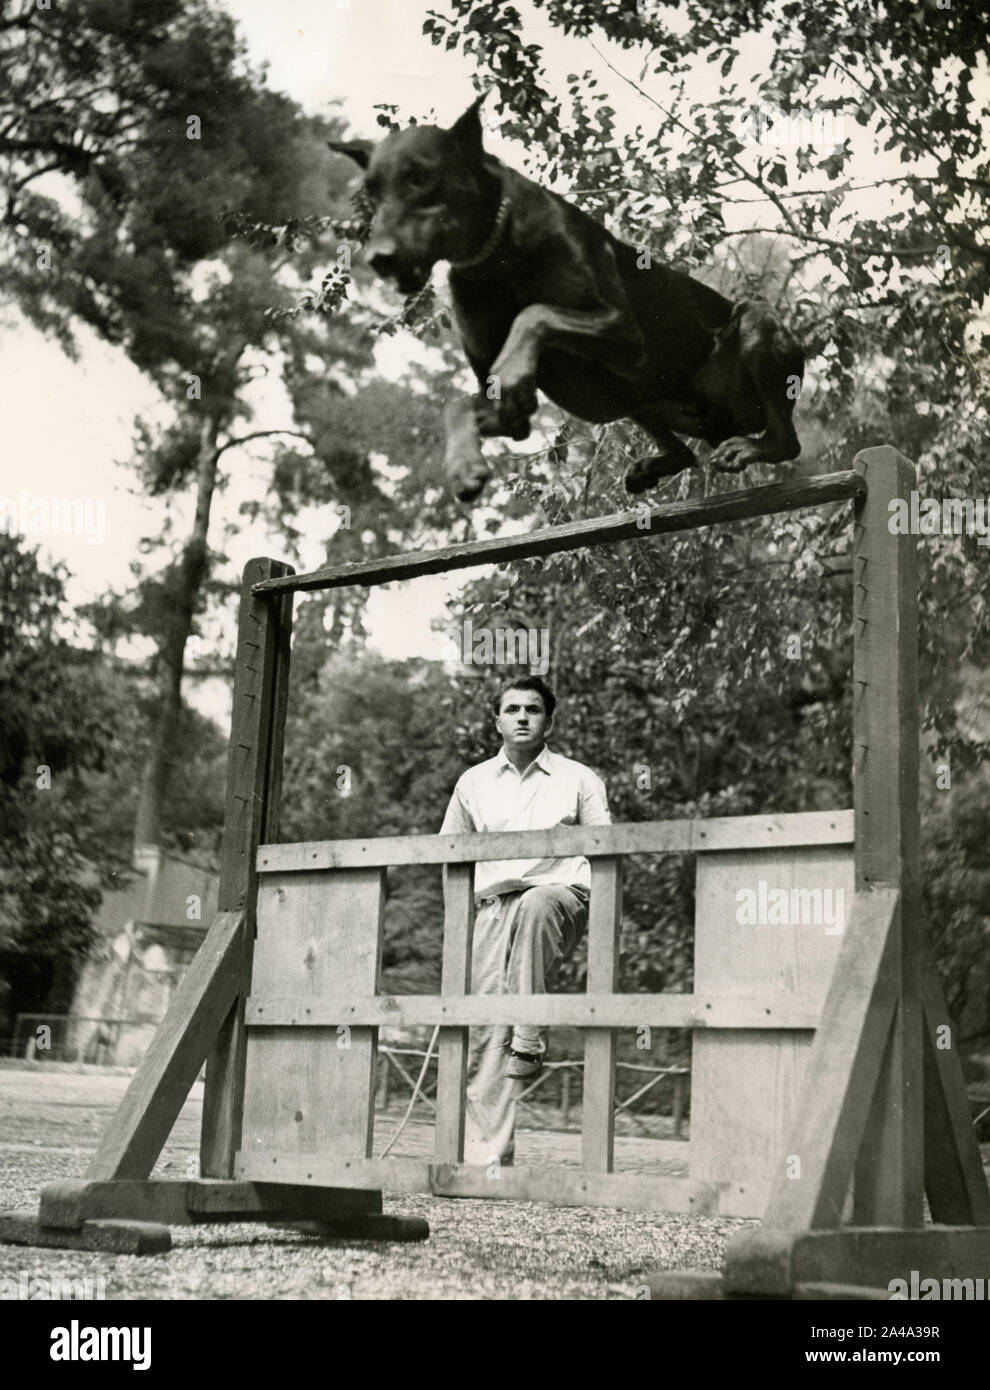 Dobermann Pinscher dog jumping the obstacle during training, 1950s Stock Photo